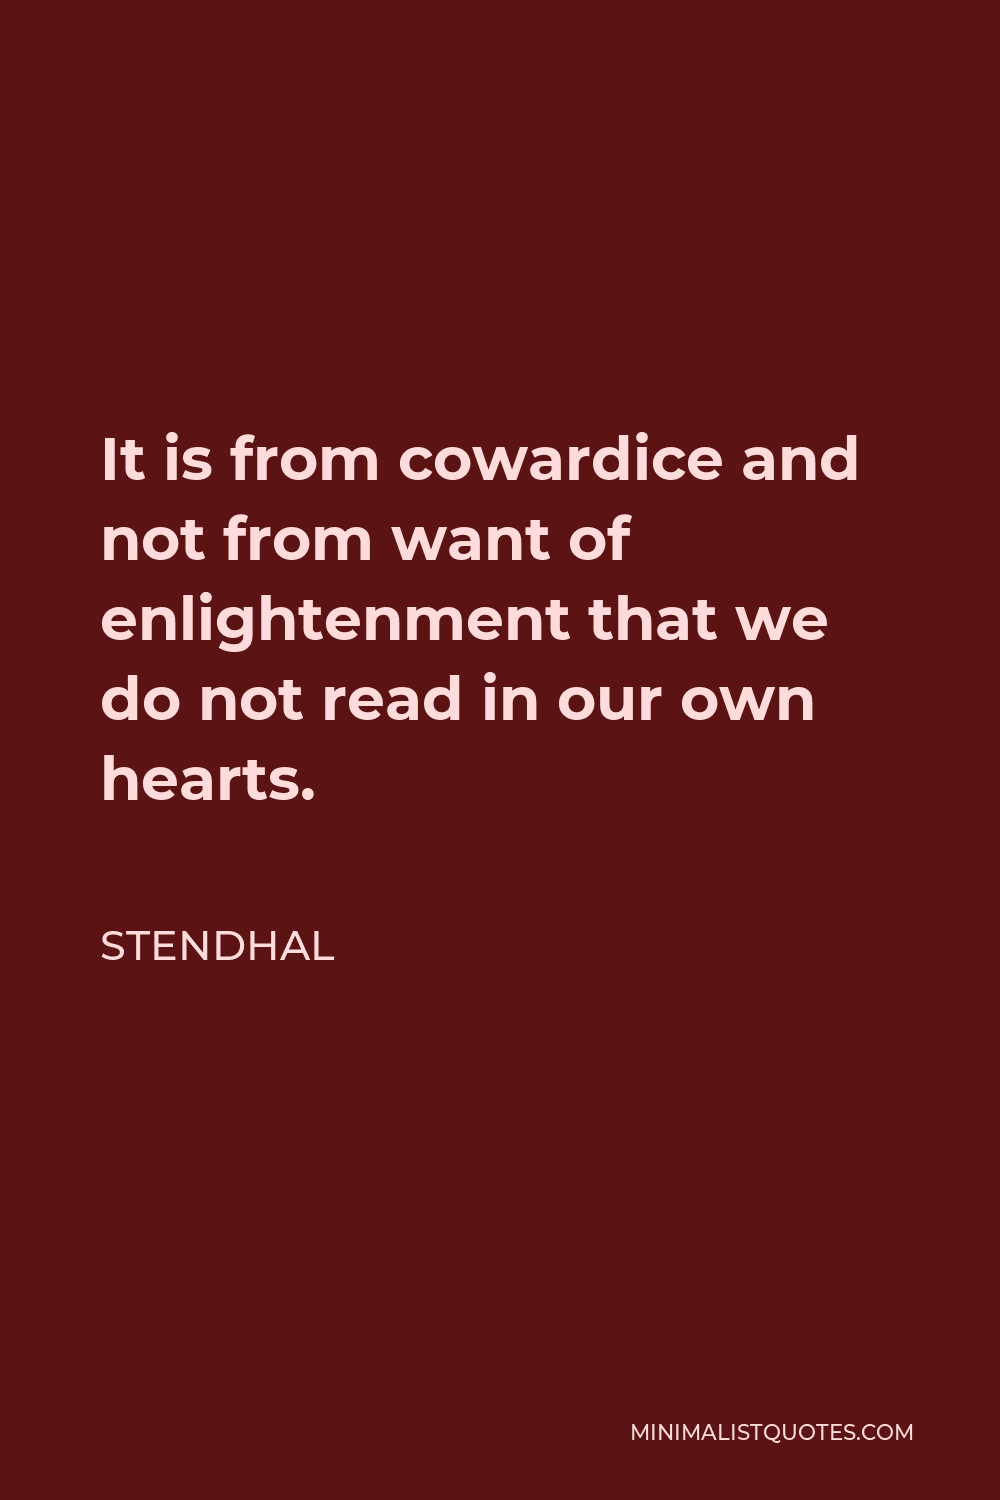 Stendhal Quote - It is from cowardice and not from want of enlightenment that we do not read in our own hearts.